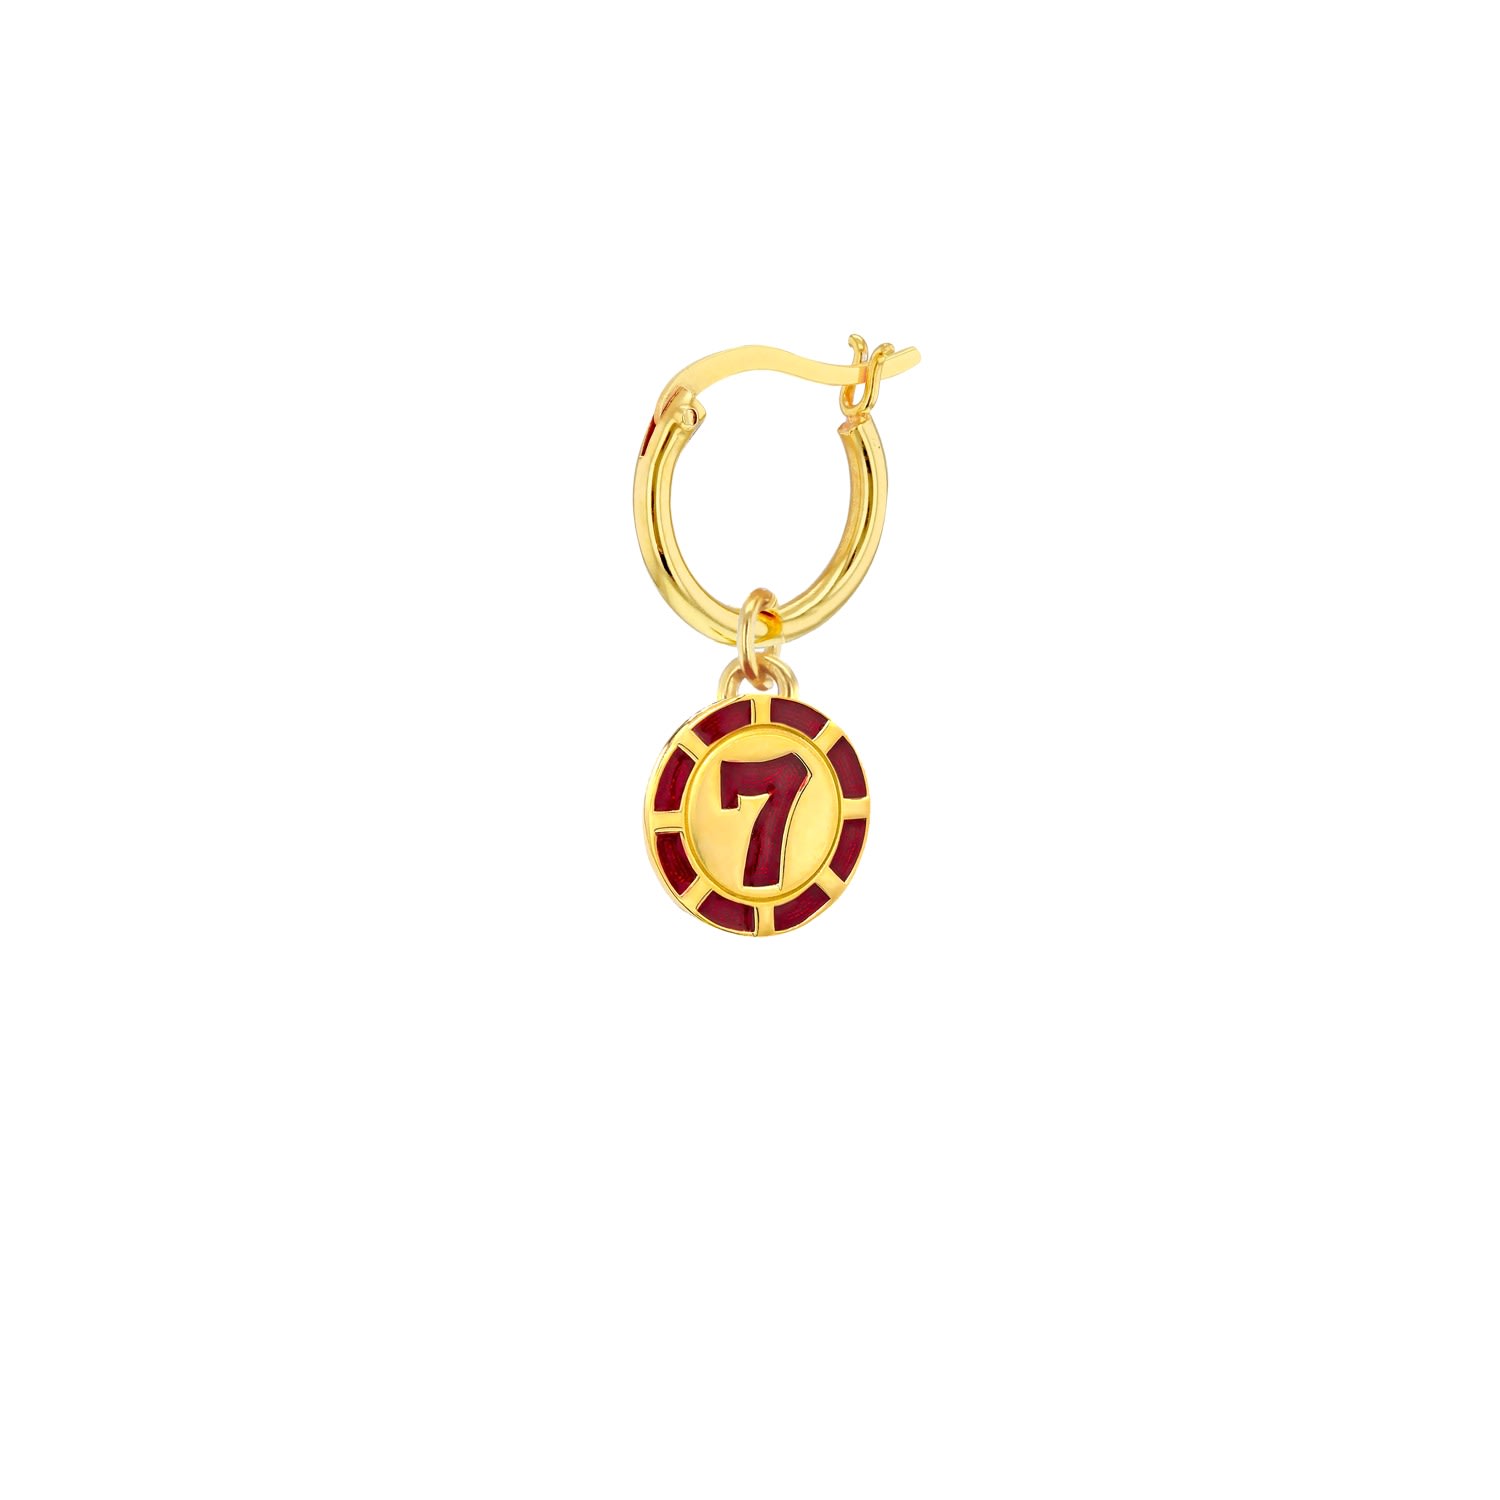 Women’s Gold / Red 18Kt Gold Plated & Red Enamel 7 Poker Chip Charm On Gold Plated Hoop Earring True Rocks